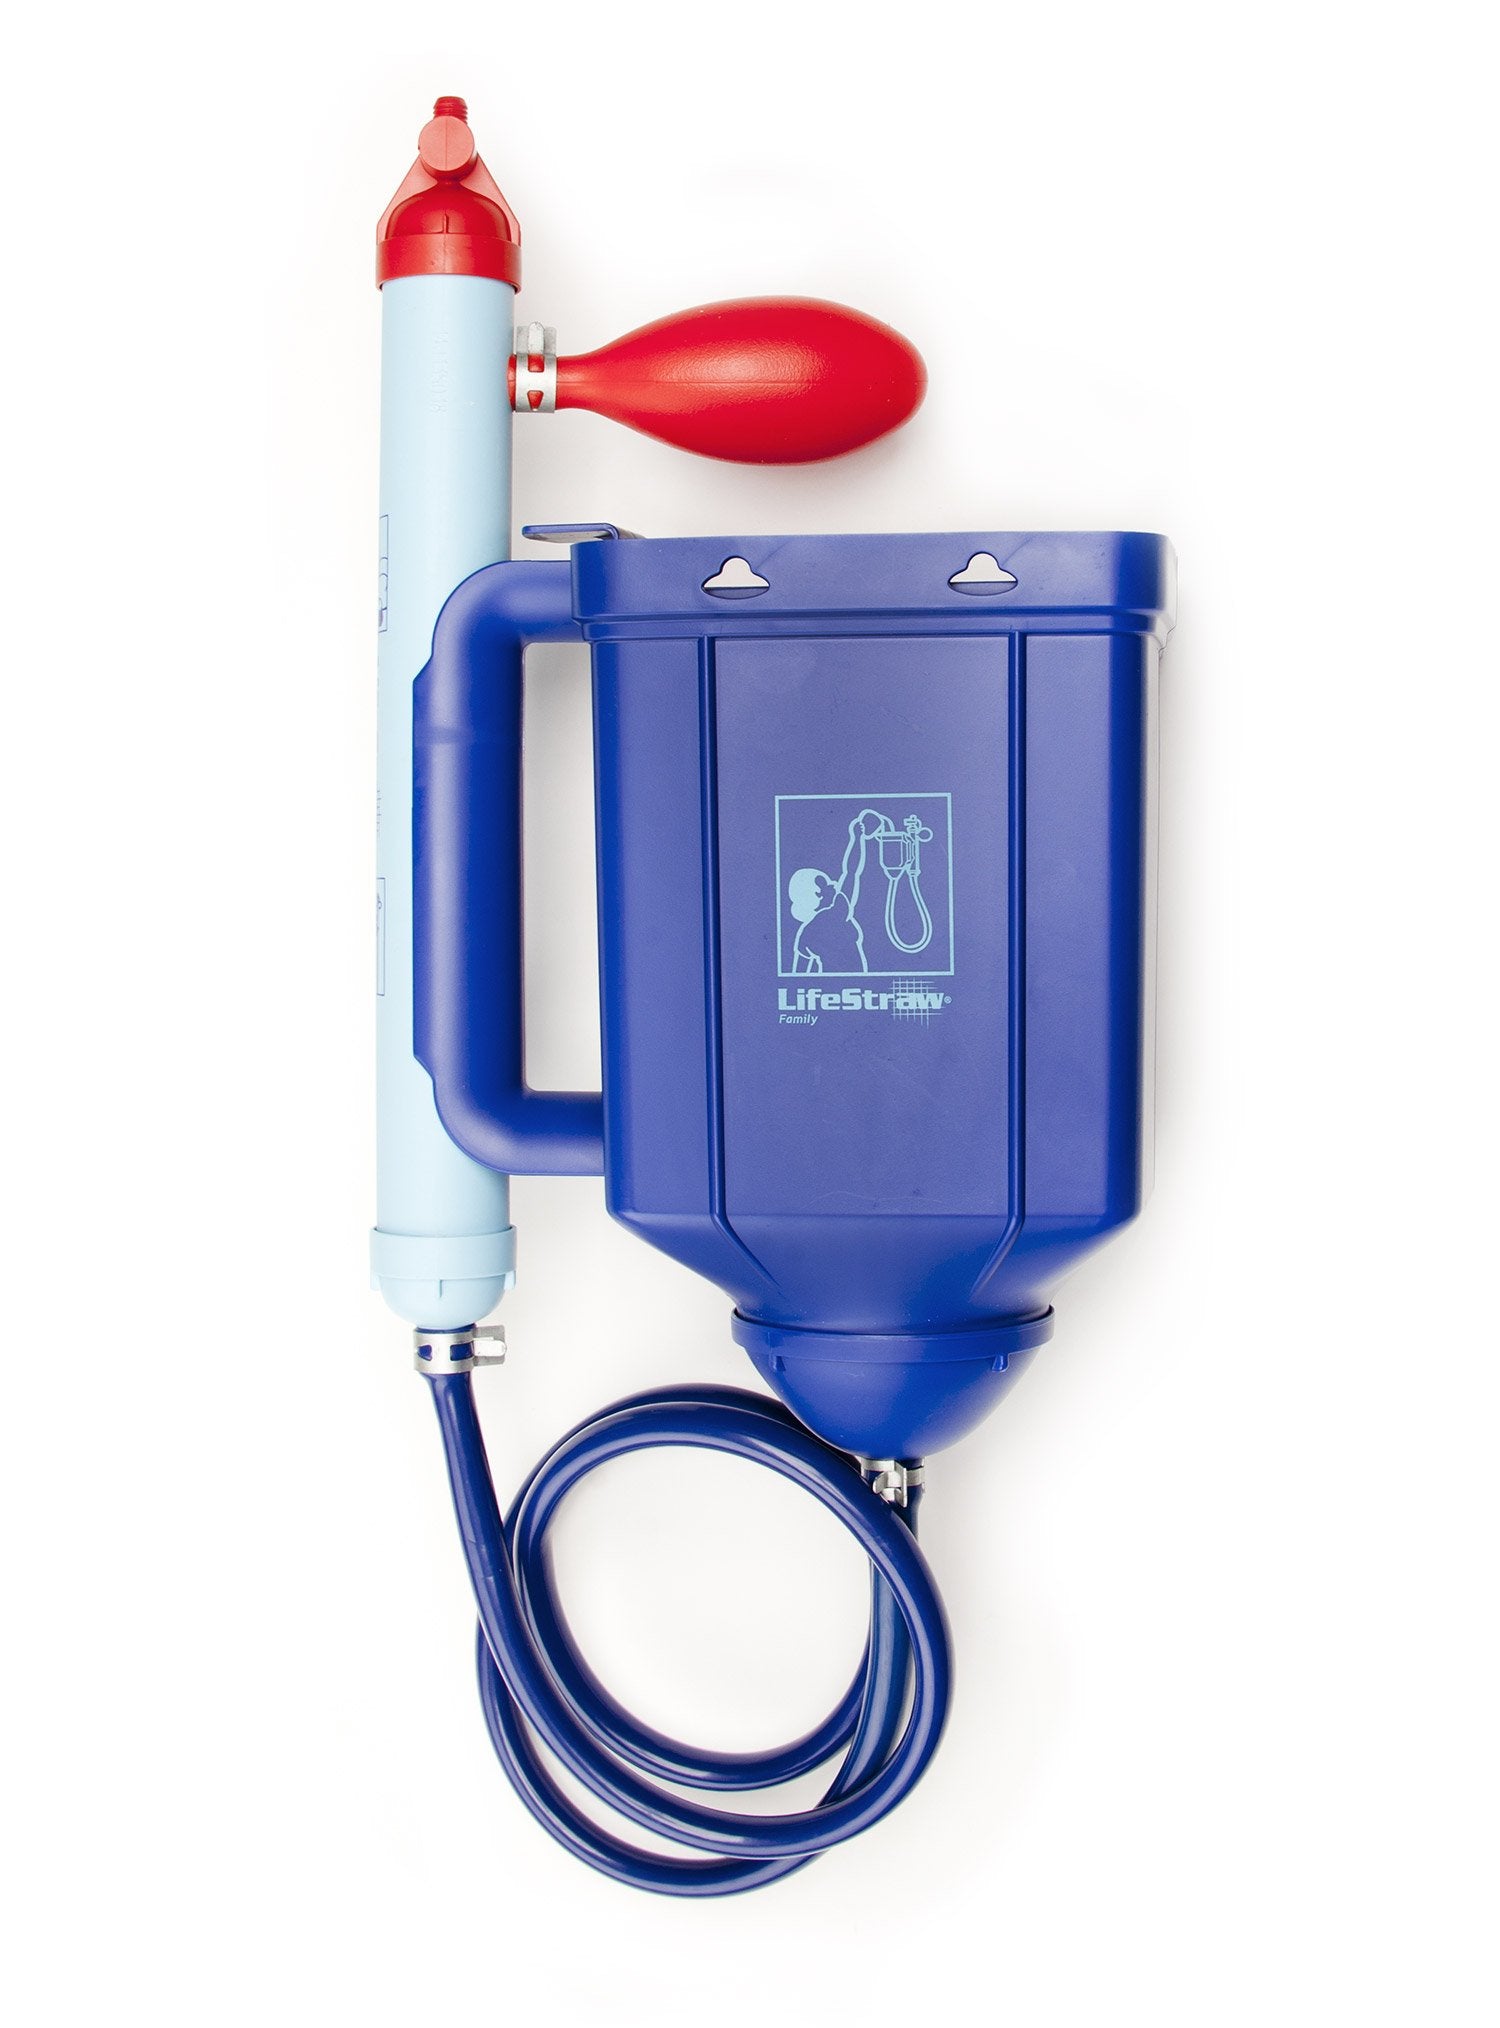 LifeStraw Max – High Flow, High-Capacity Water Filter and Purifier for Survival, Humanitarian Aid, and Remote Job Sites Blue